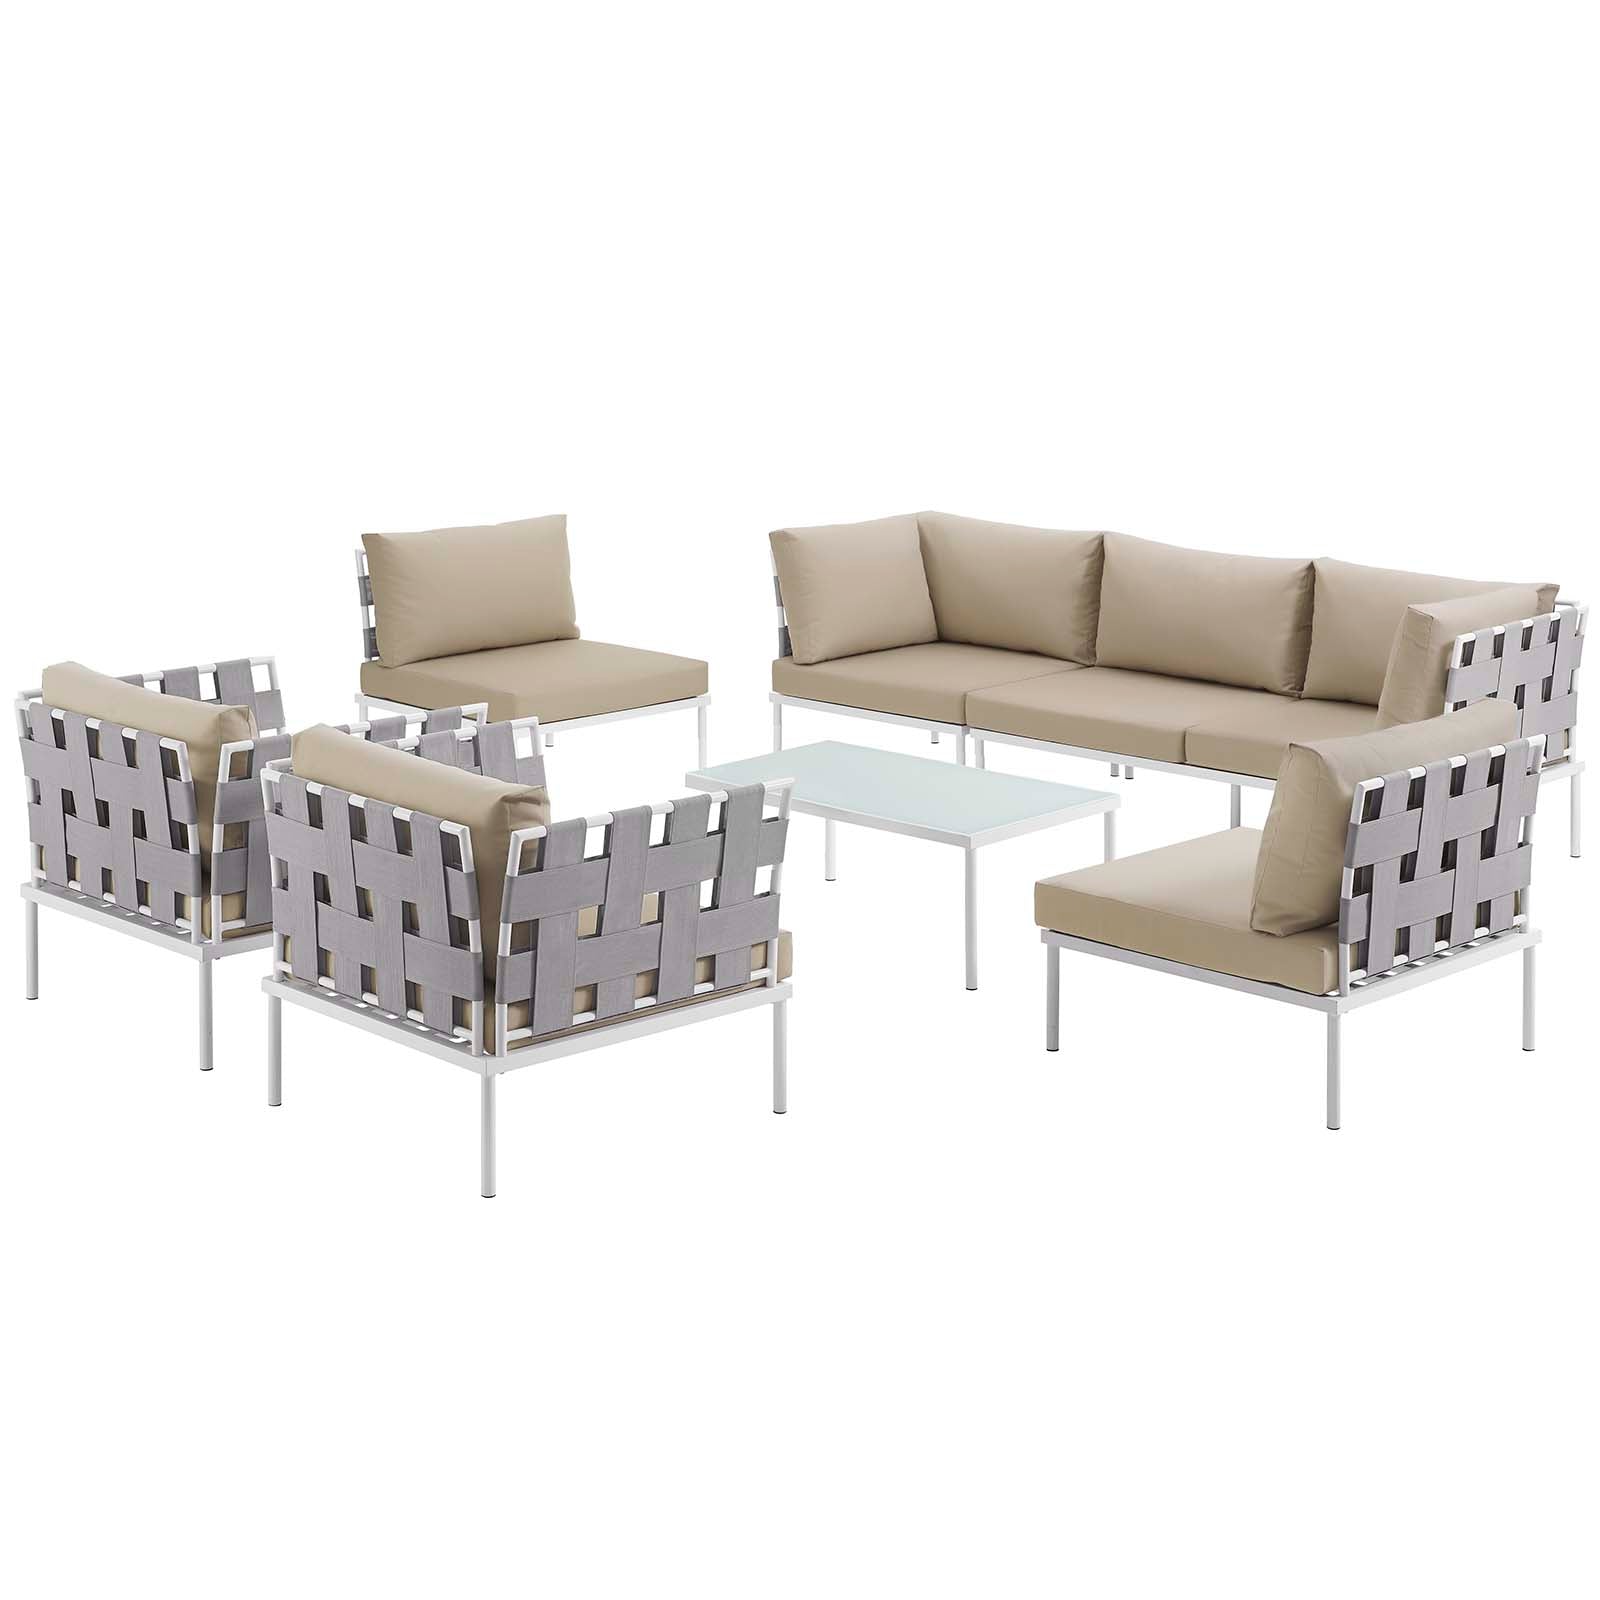 Modway Outdoor Conversation Sets - Harmony 8 Piece Outdoor 132"W Patio Aluminum Sectional Sofa Set Whit